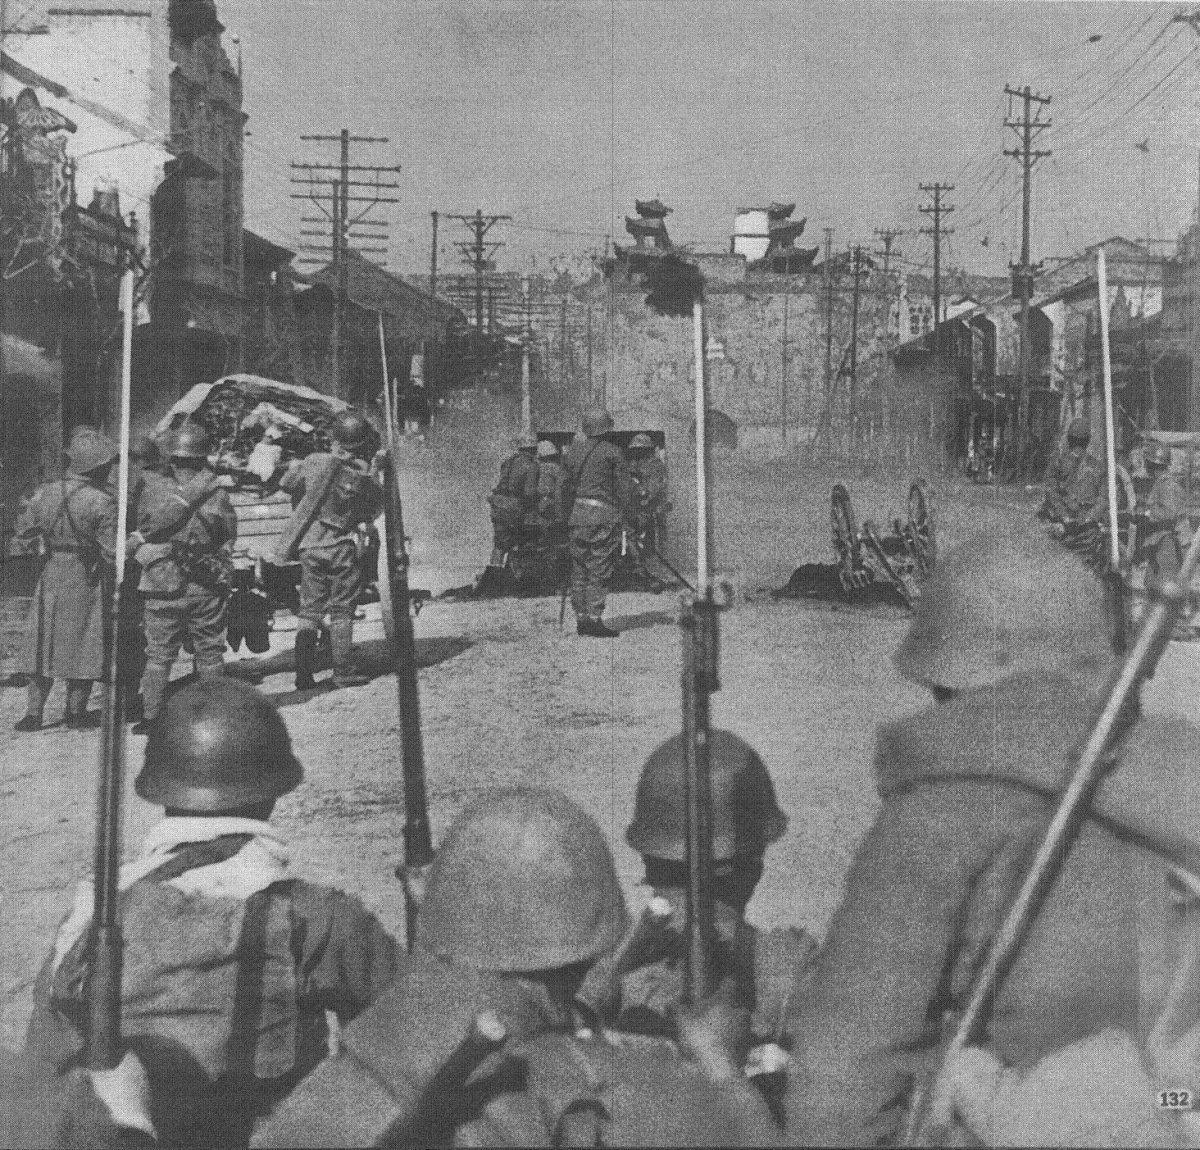 Japanese troops attacking the Zhonghua Gate of the Nanjing city wall with a field gun, China, 12 Dec 1937